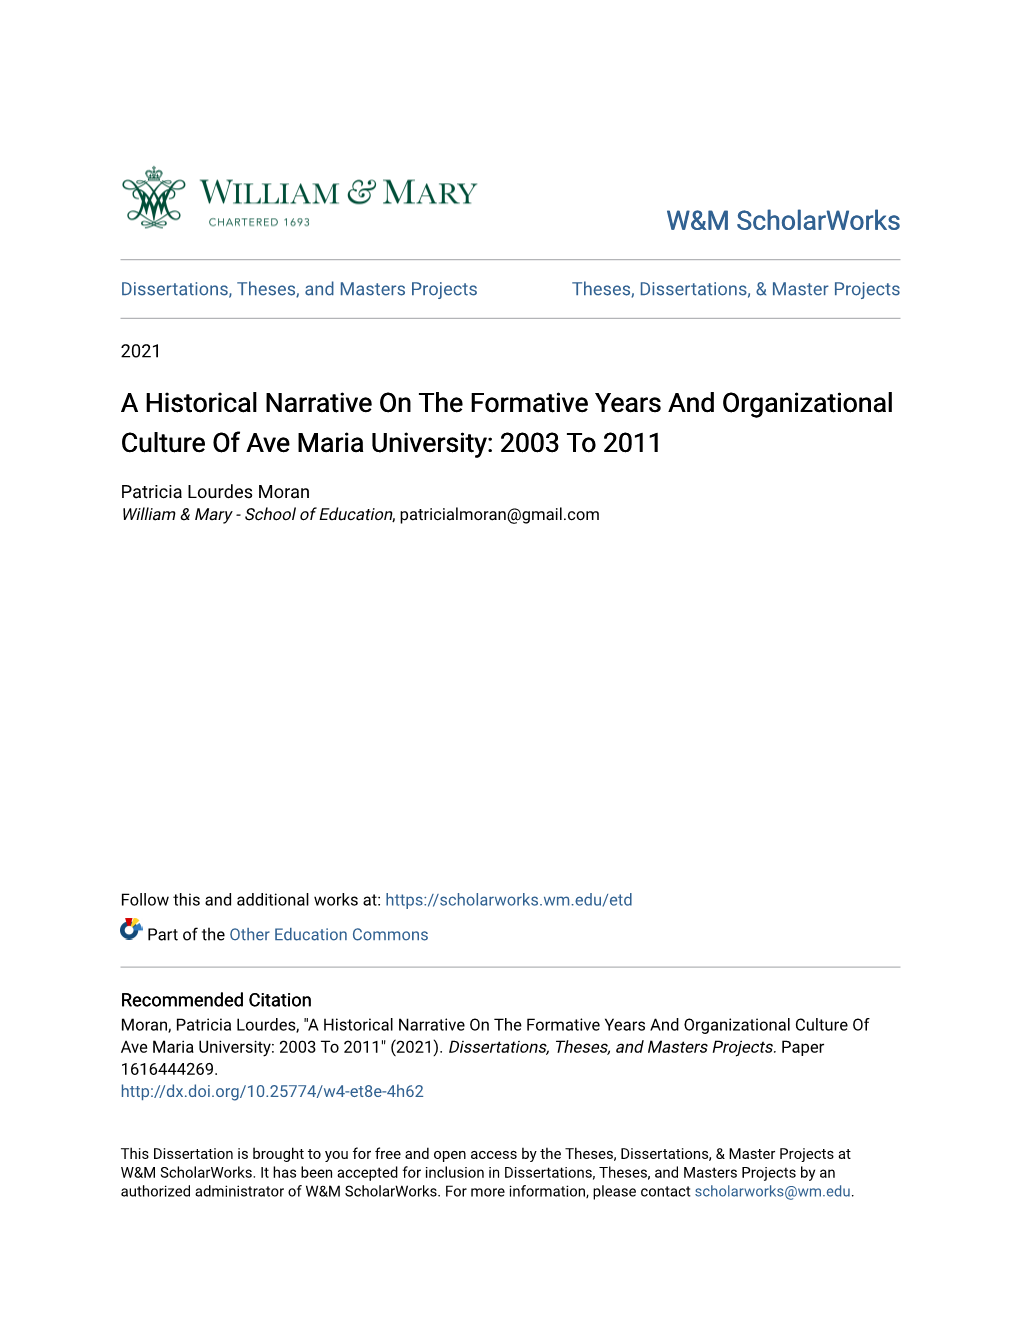 A Historical Narrative on the Formative Years and Organizational Culture of Ave Maria University: 2003 to 2011